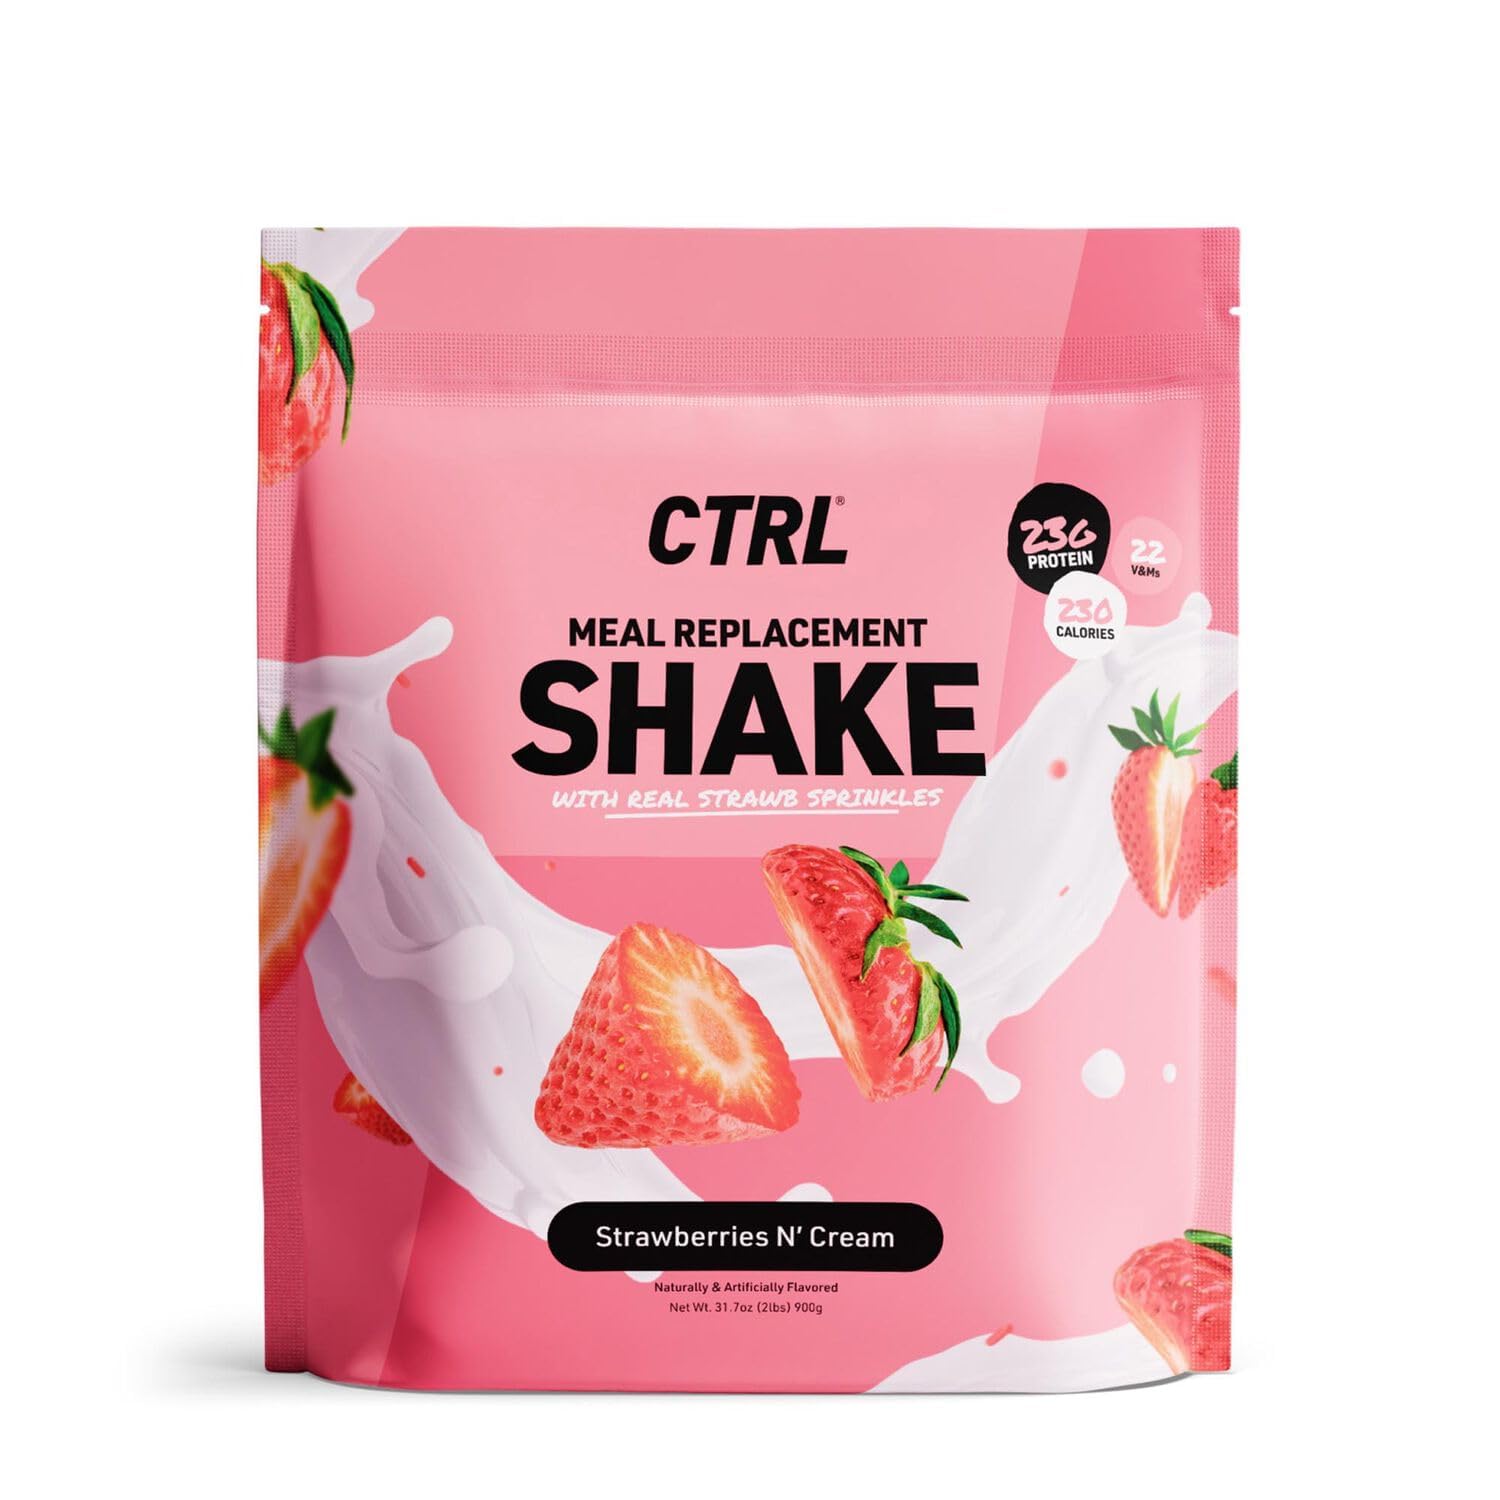 CTRL Meal Replacement Shake | Strawberries N' Cream | 2lbs, 23g protein